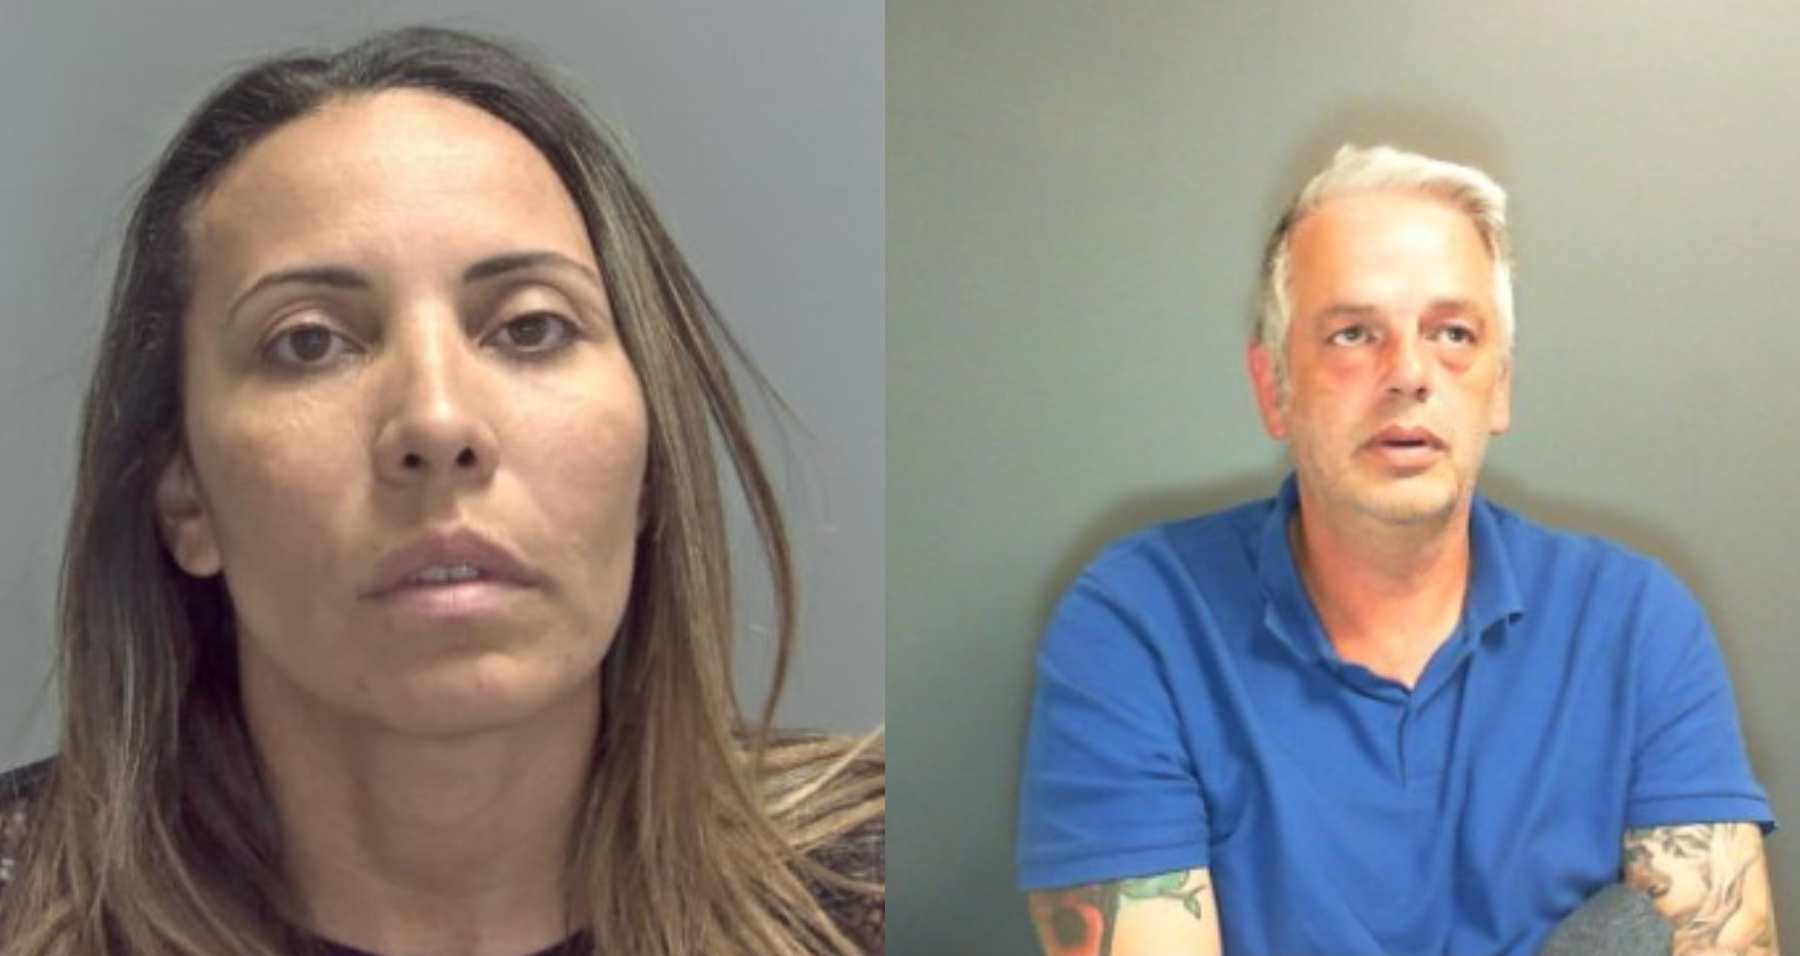 Fabiani Alvez De Souza, aged 42, and Gareth Derby, aged 53, both of Town Street, Upwell, Norfolk, were both sentenced to five years’ imprisonment at Leeds Crown Court